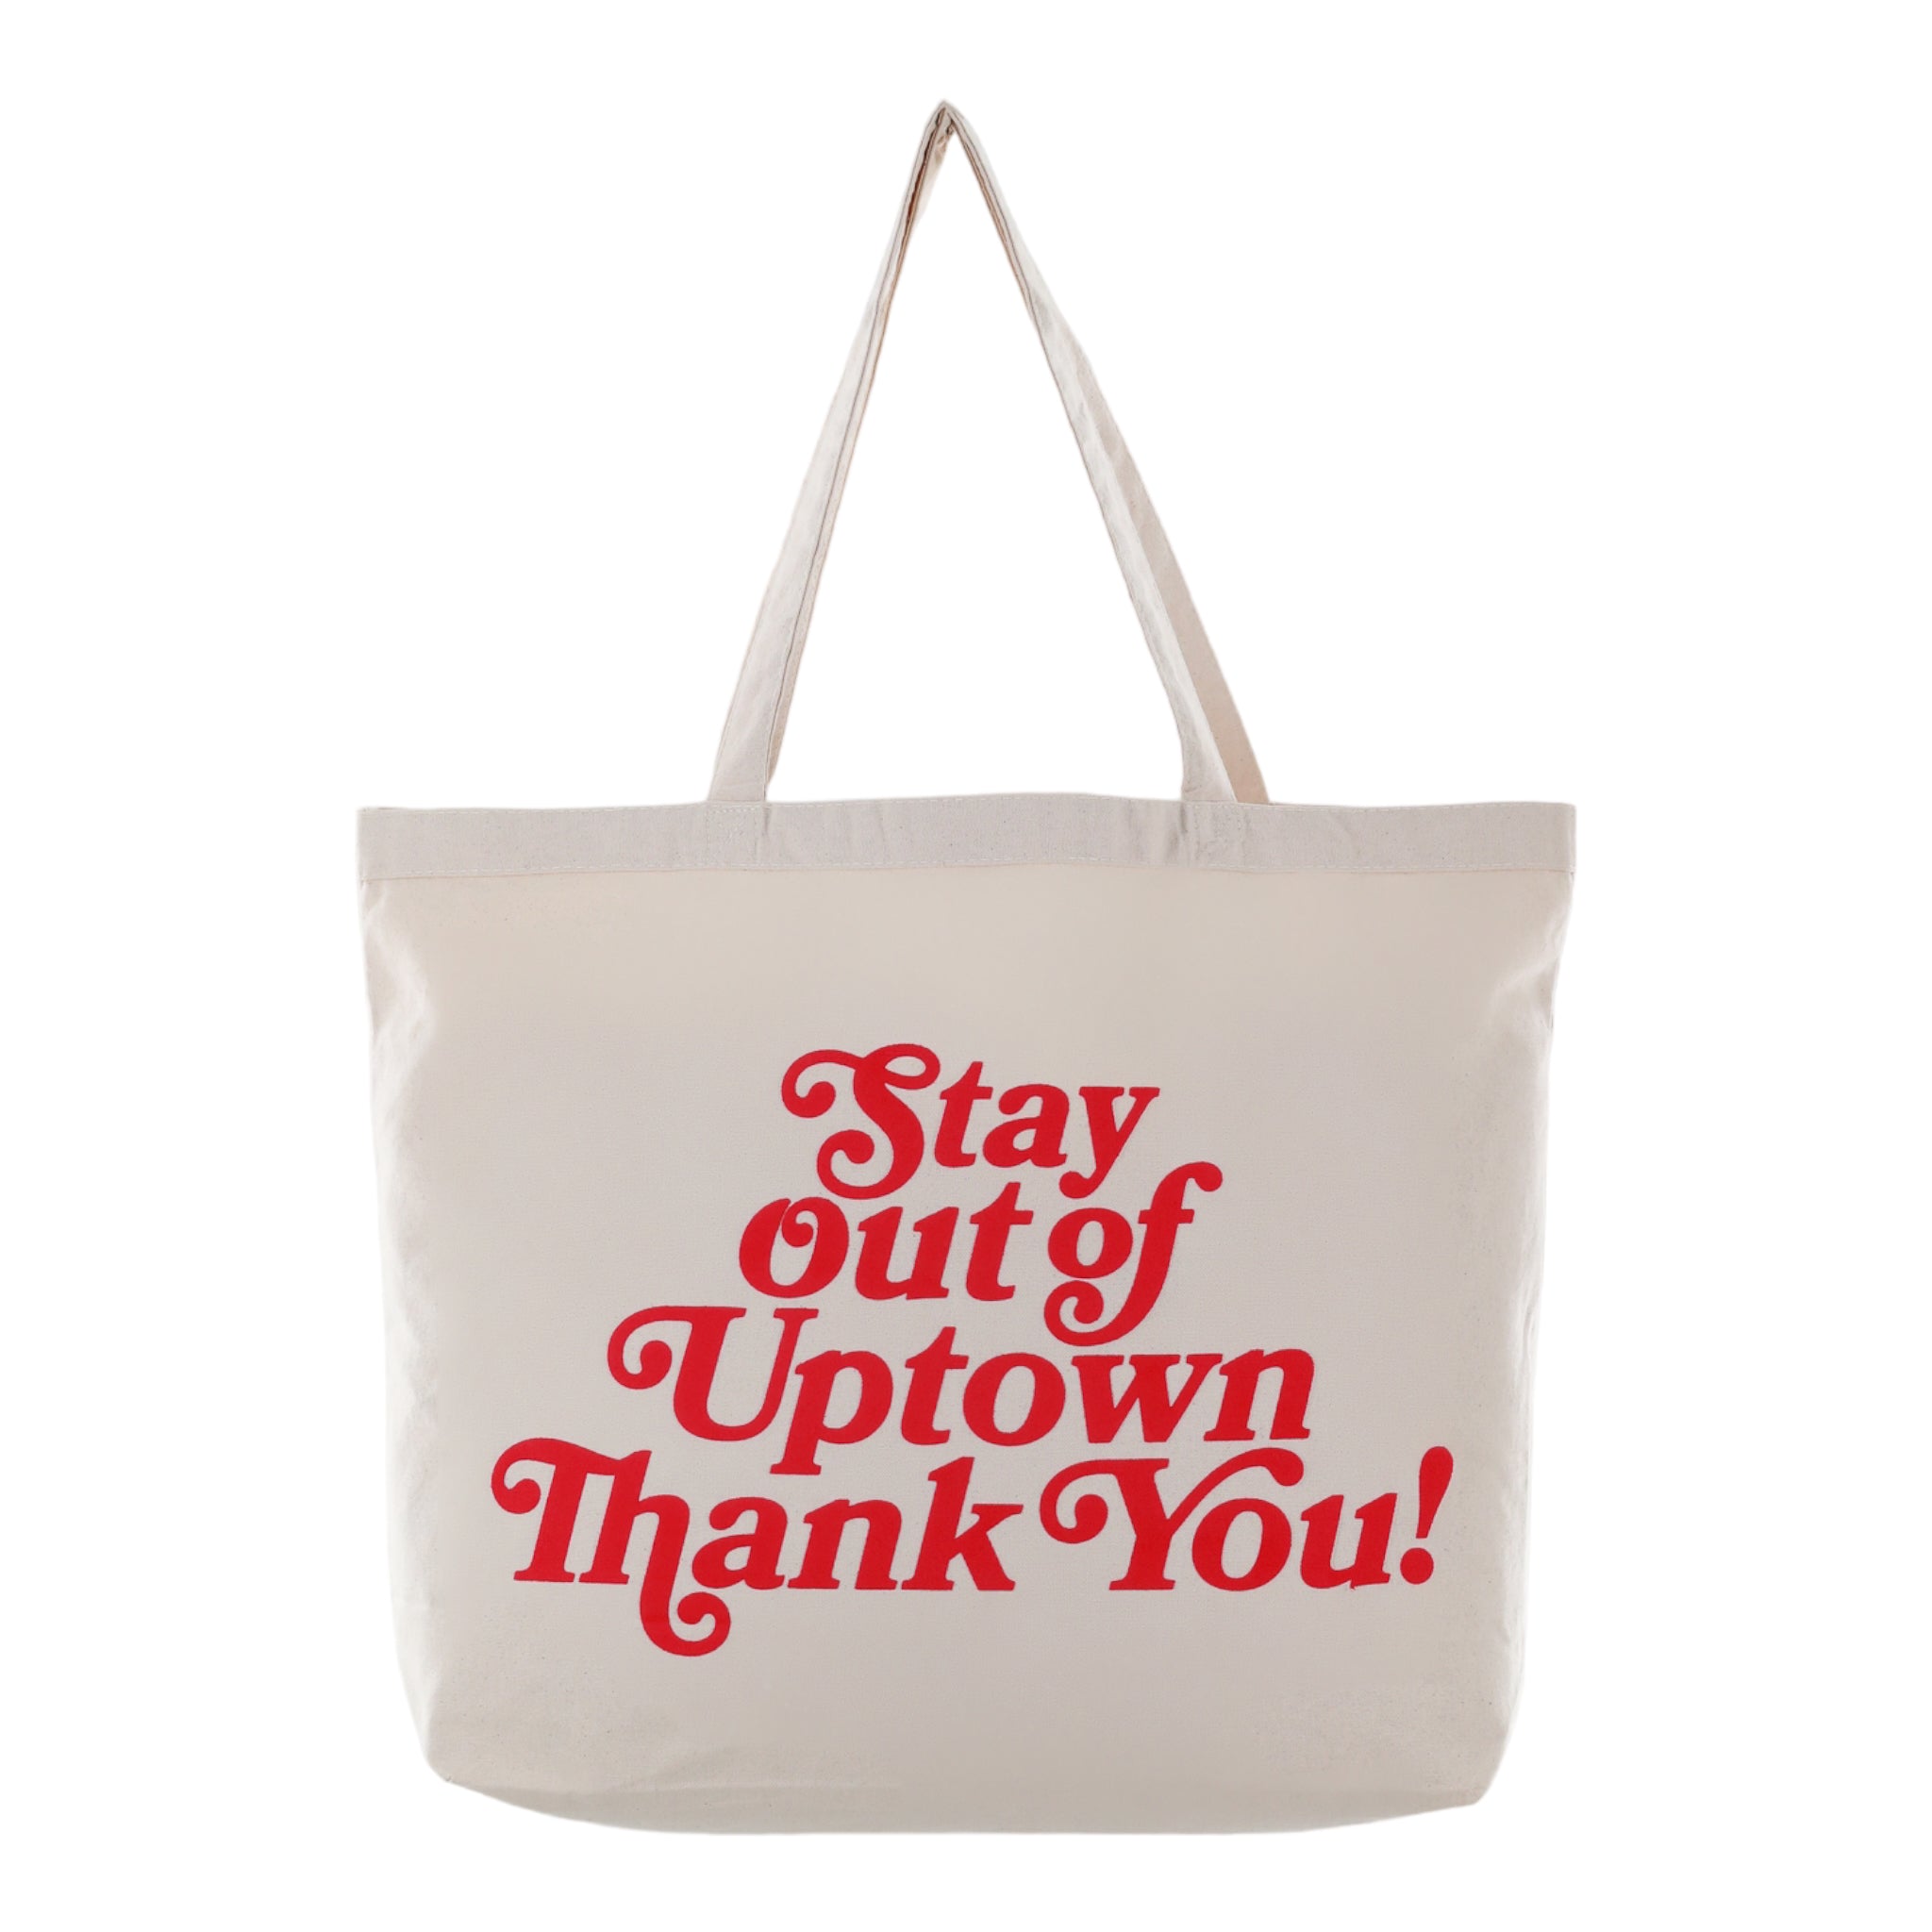 Stay Out of Uptown - Natural Canvas Tote Bag